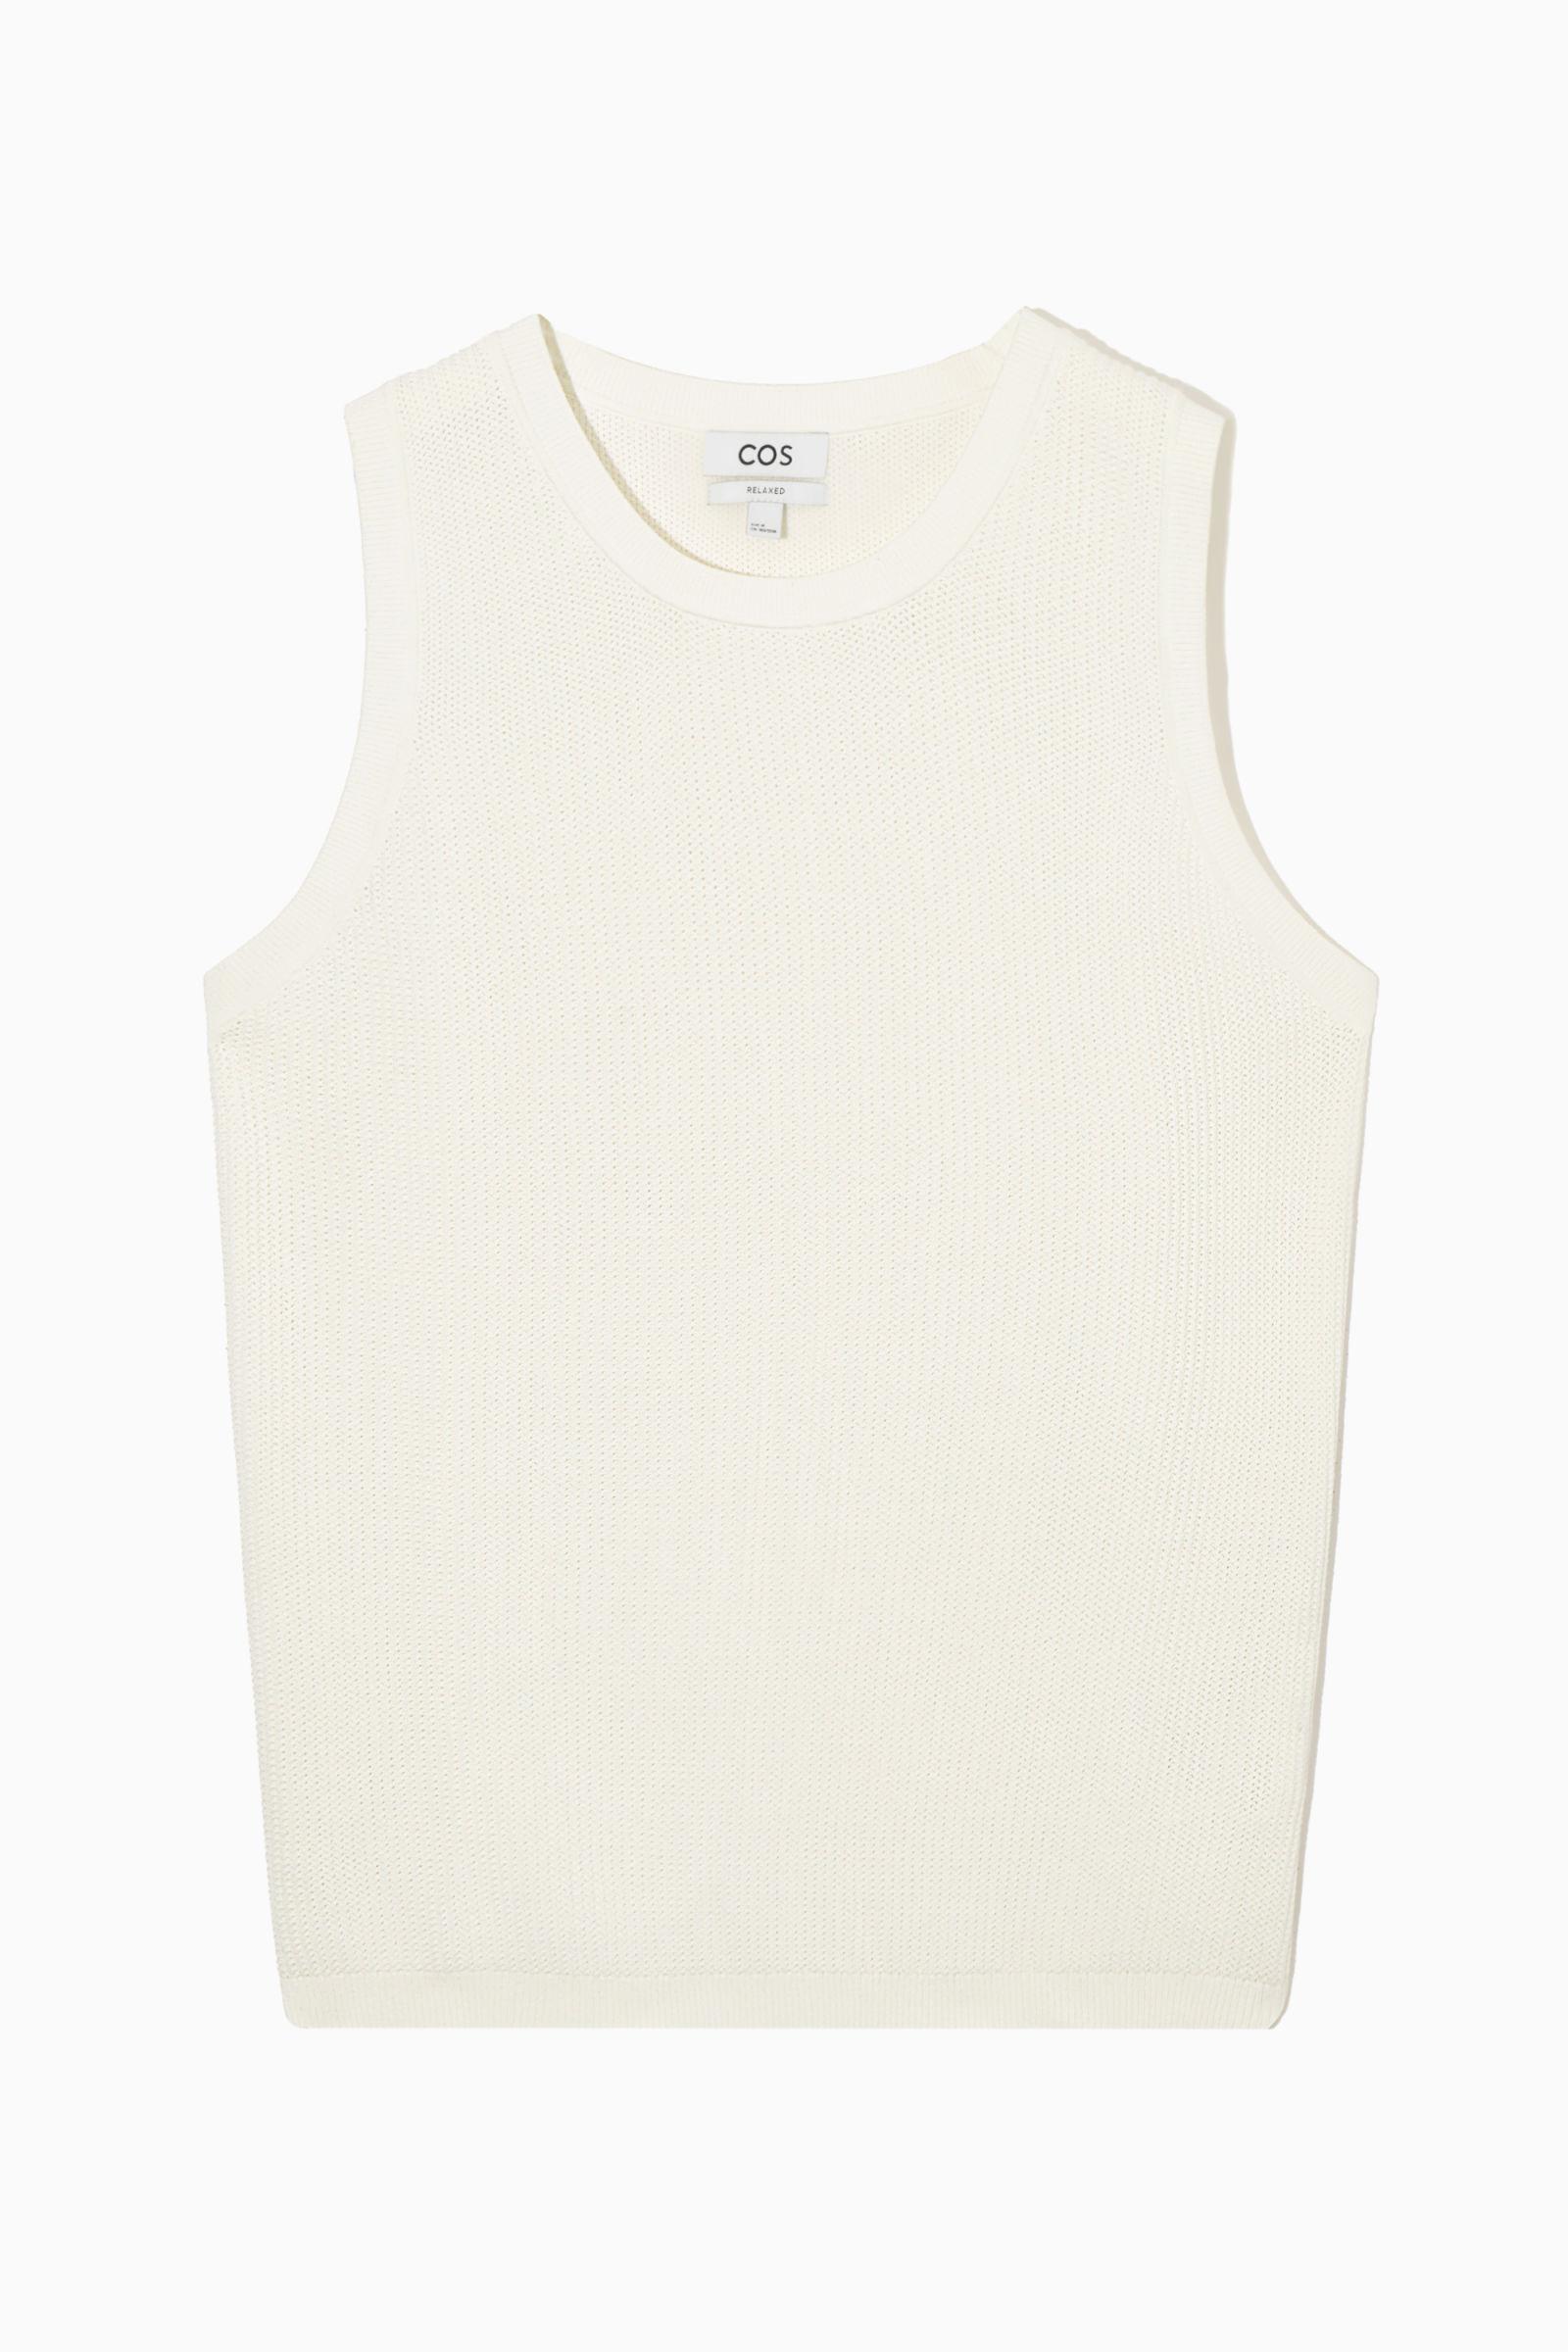 COS Textured Knitted Vest in White for Men | Lyst UK